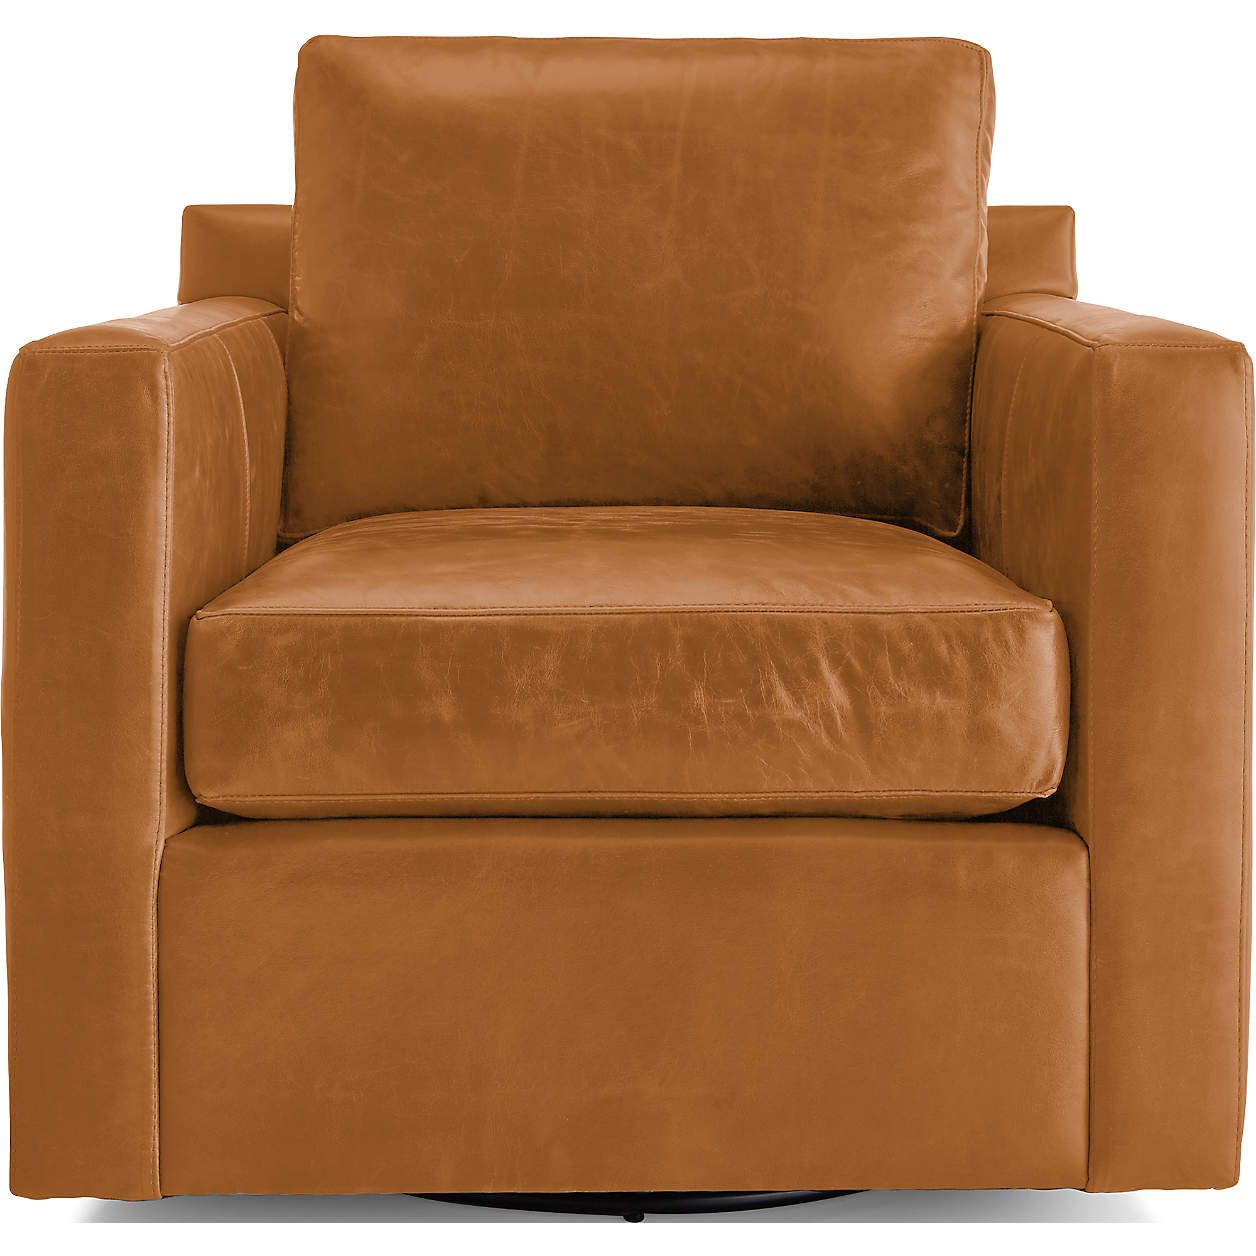 Barrett Leather Track Arm Swivel Chair + Reviews | Crate and Barrel | Crate & Barrel